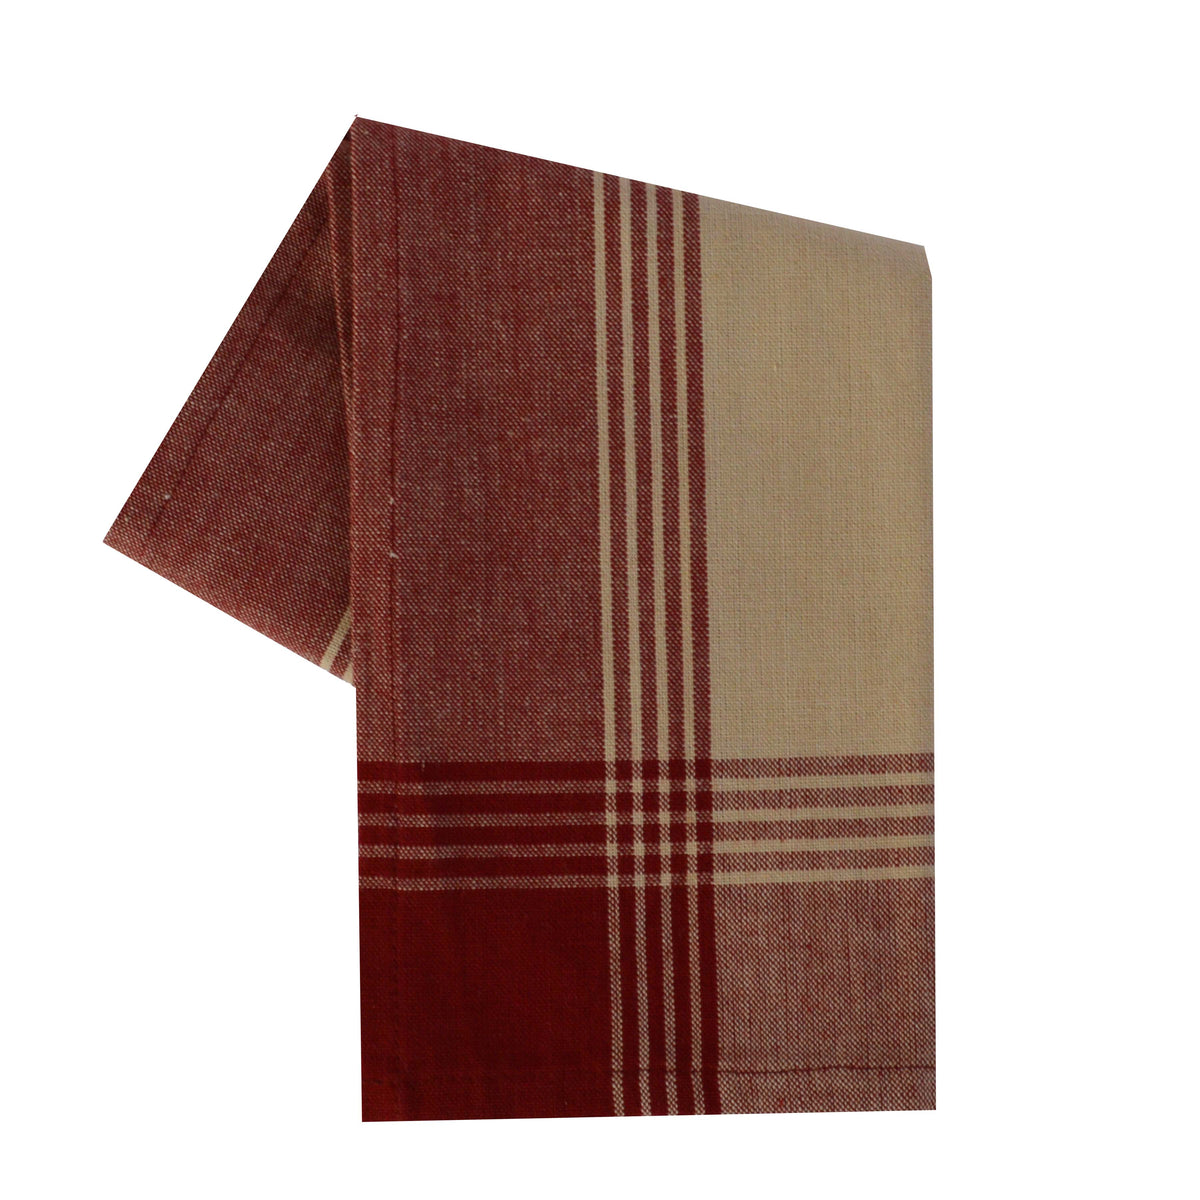 Variety Towel Set - Red and Teadye Set of 4